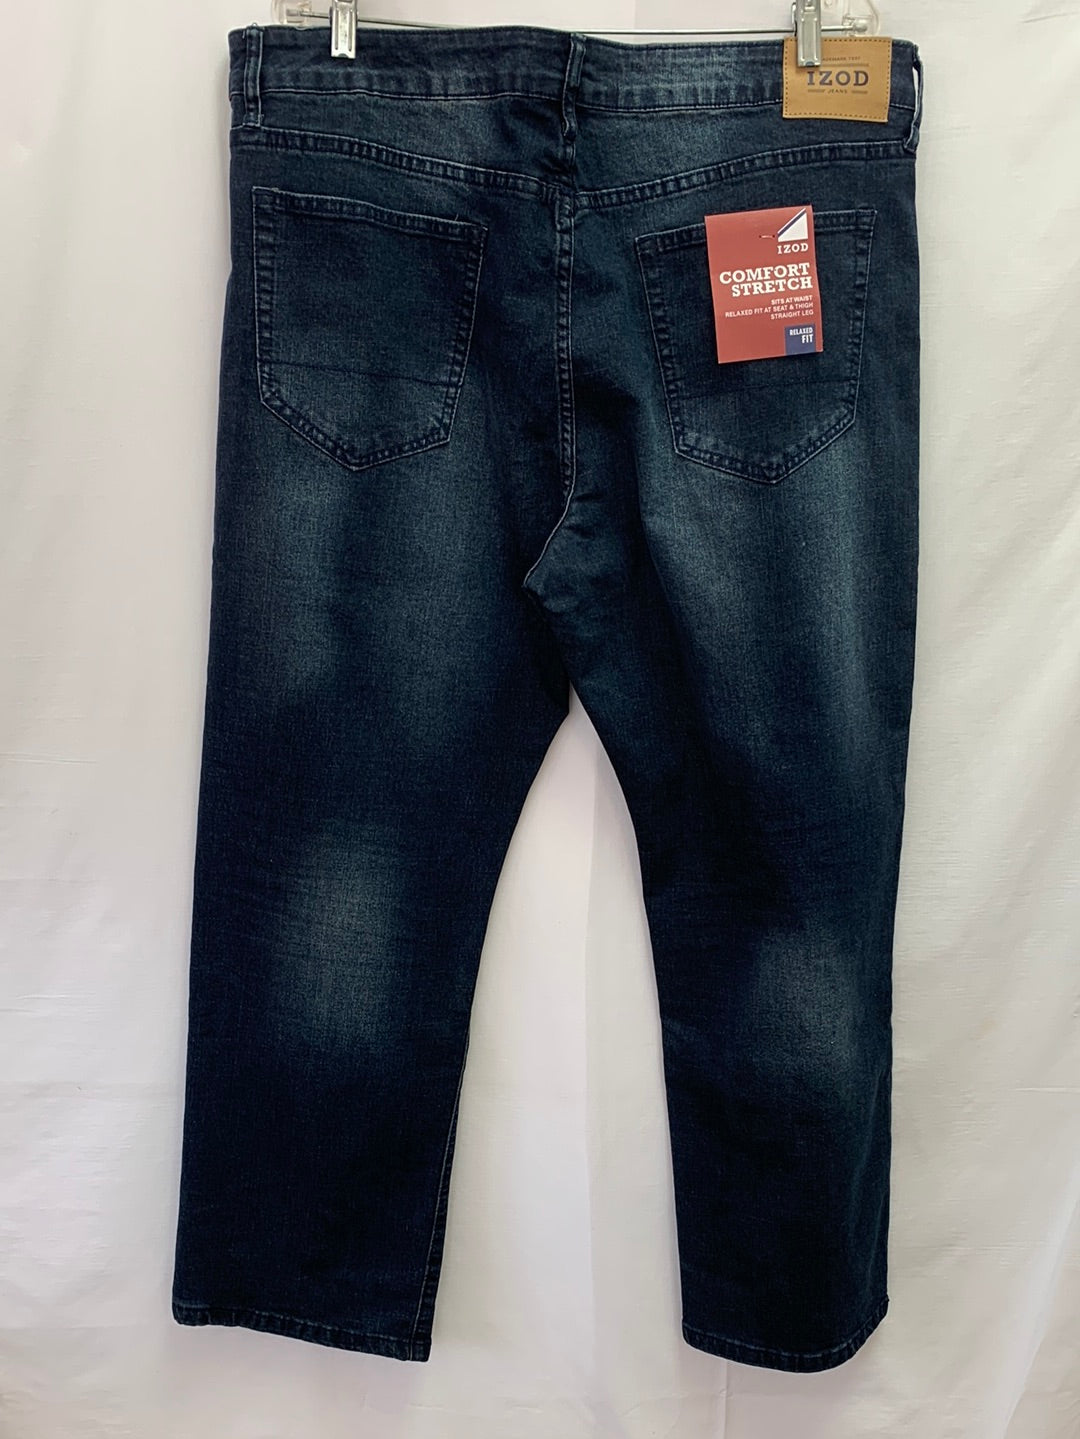 NWT - IZOD dark wash Comfort Stretch Relaxed Fit Straight Leg Jeans - 40 x 30